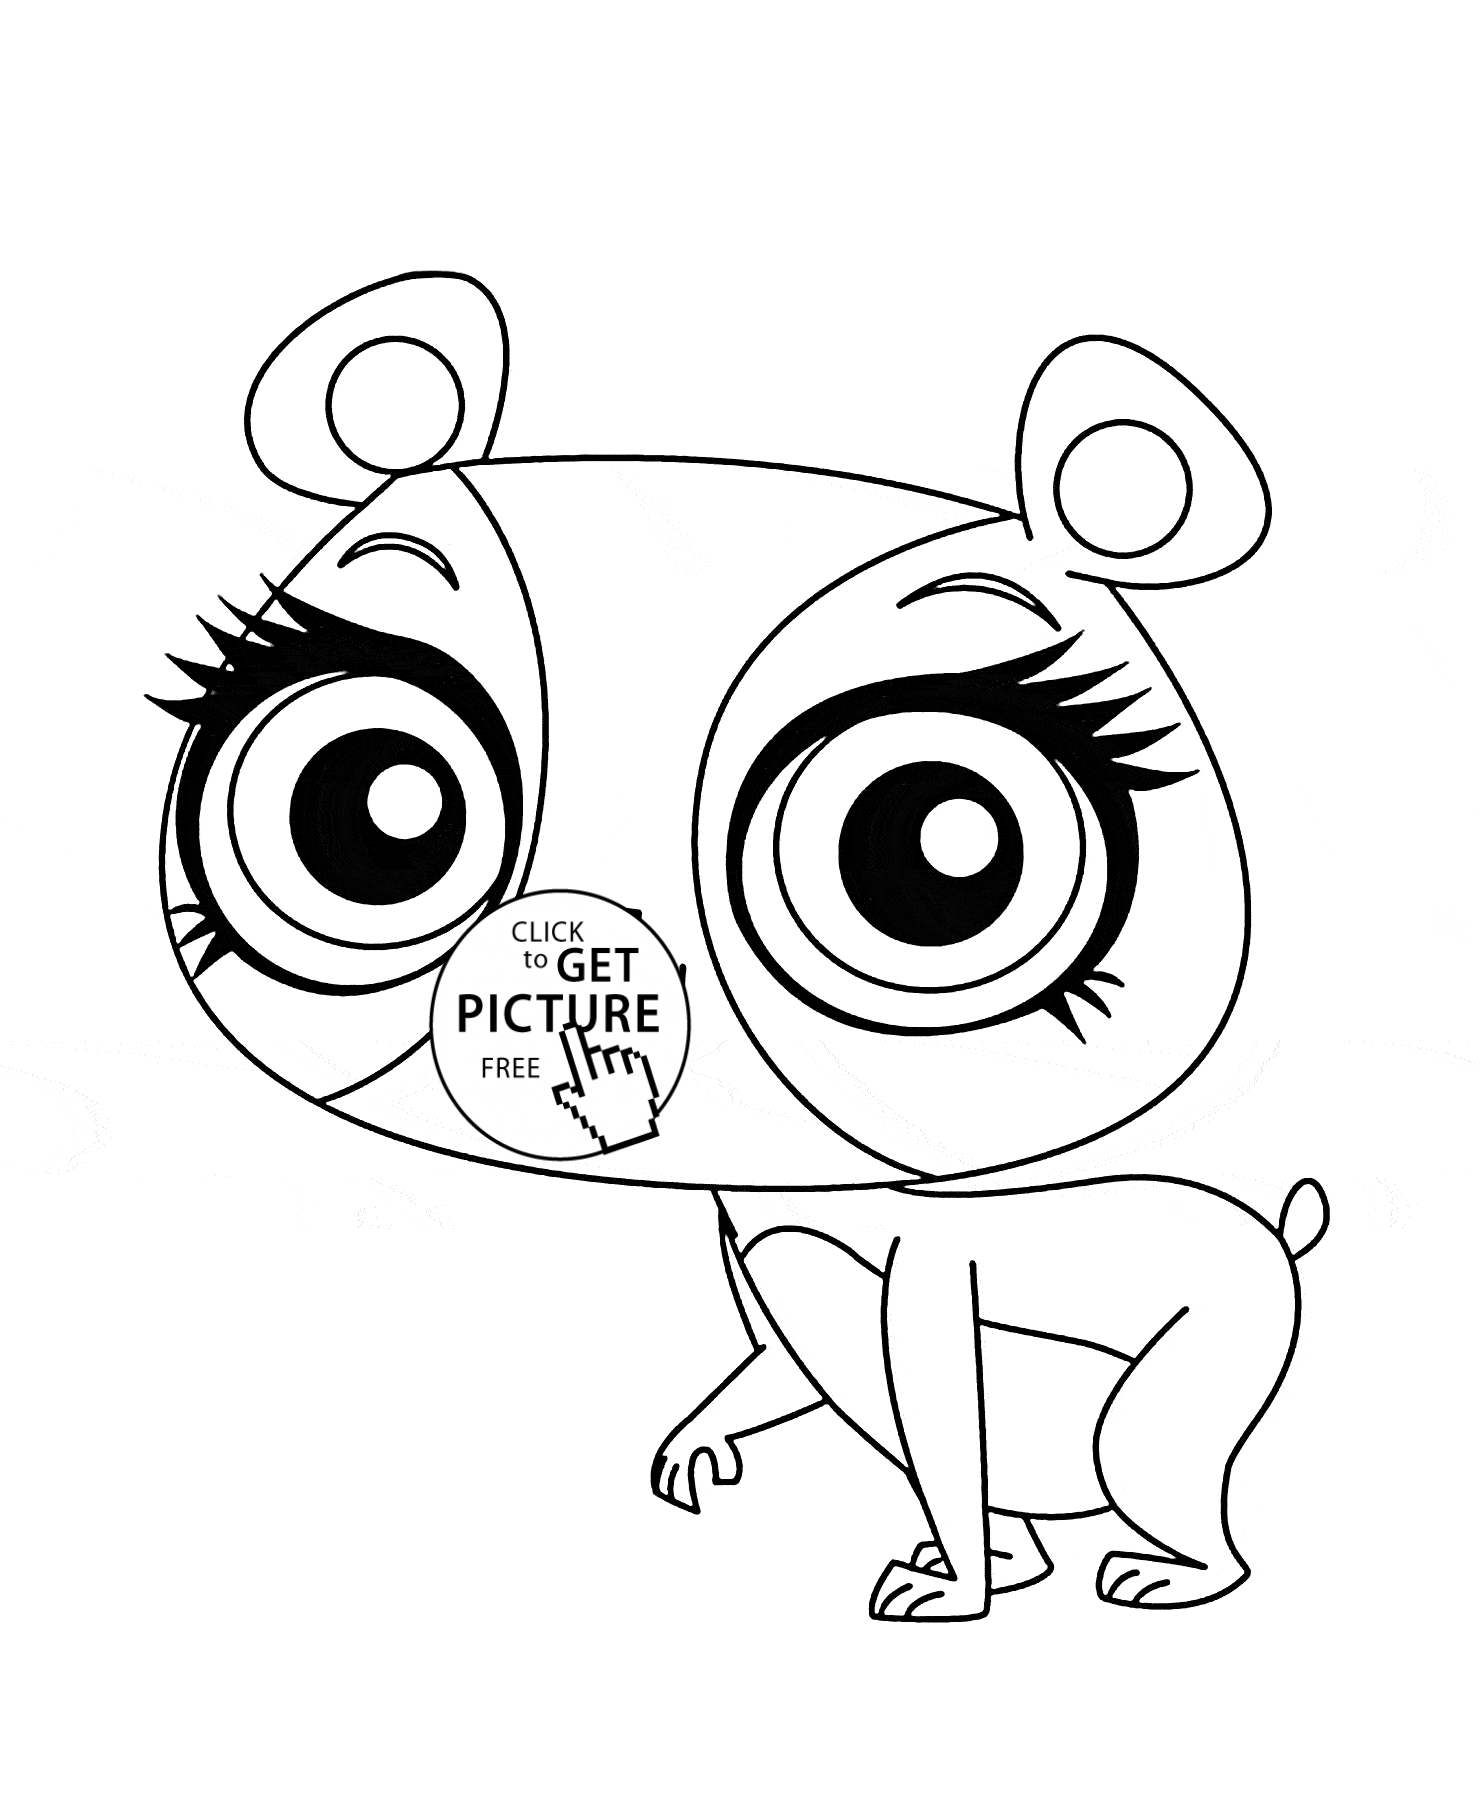 Littlest Pet Shop Penny Ling coloring page for kids, animal ...